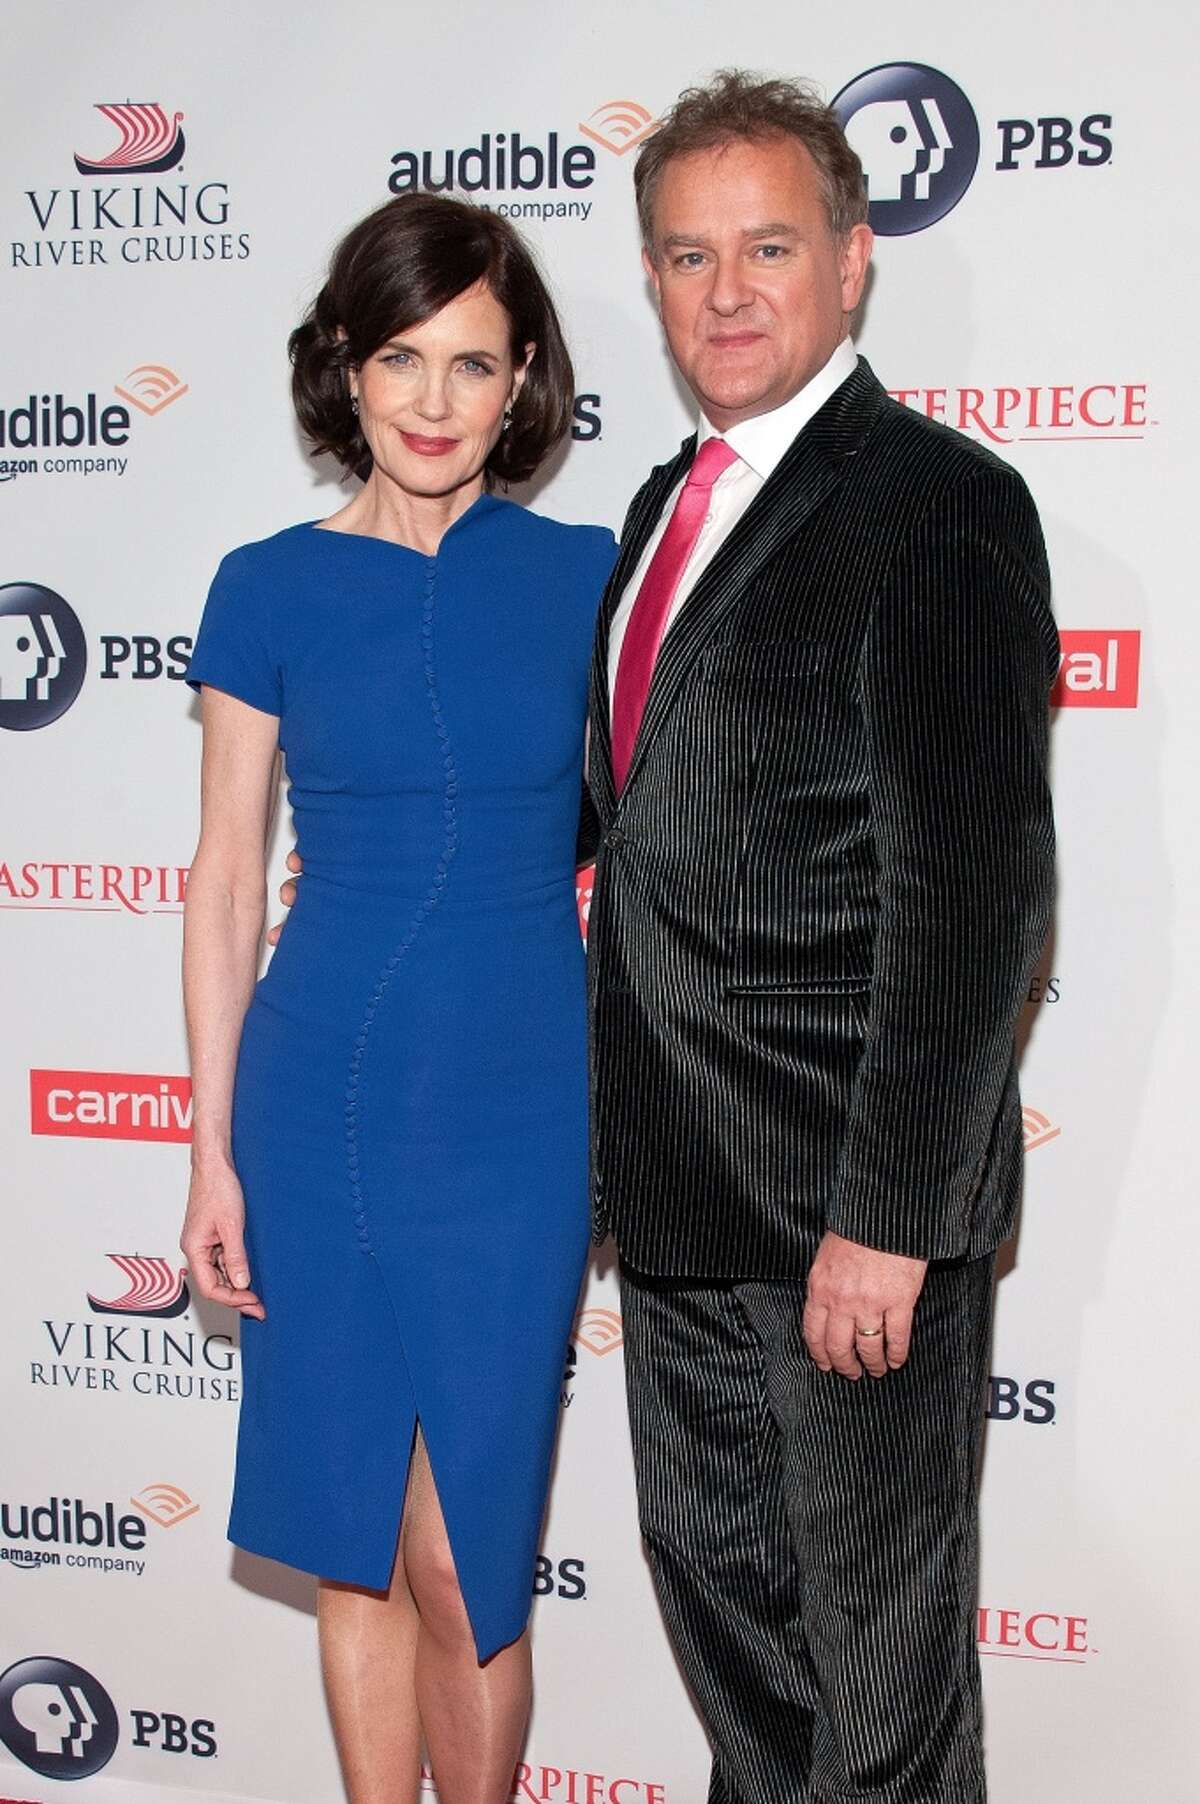 Elizabeth McGovern (L) and Hugh Bonneville attend the "Downton Abbey" series season six premiere at the Millenium Hotel on December 7, 2015 in New York City.